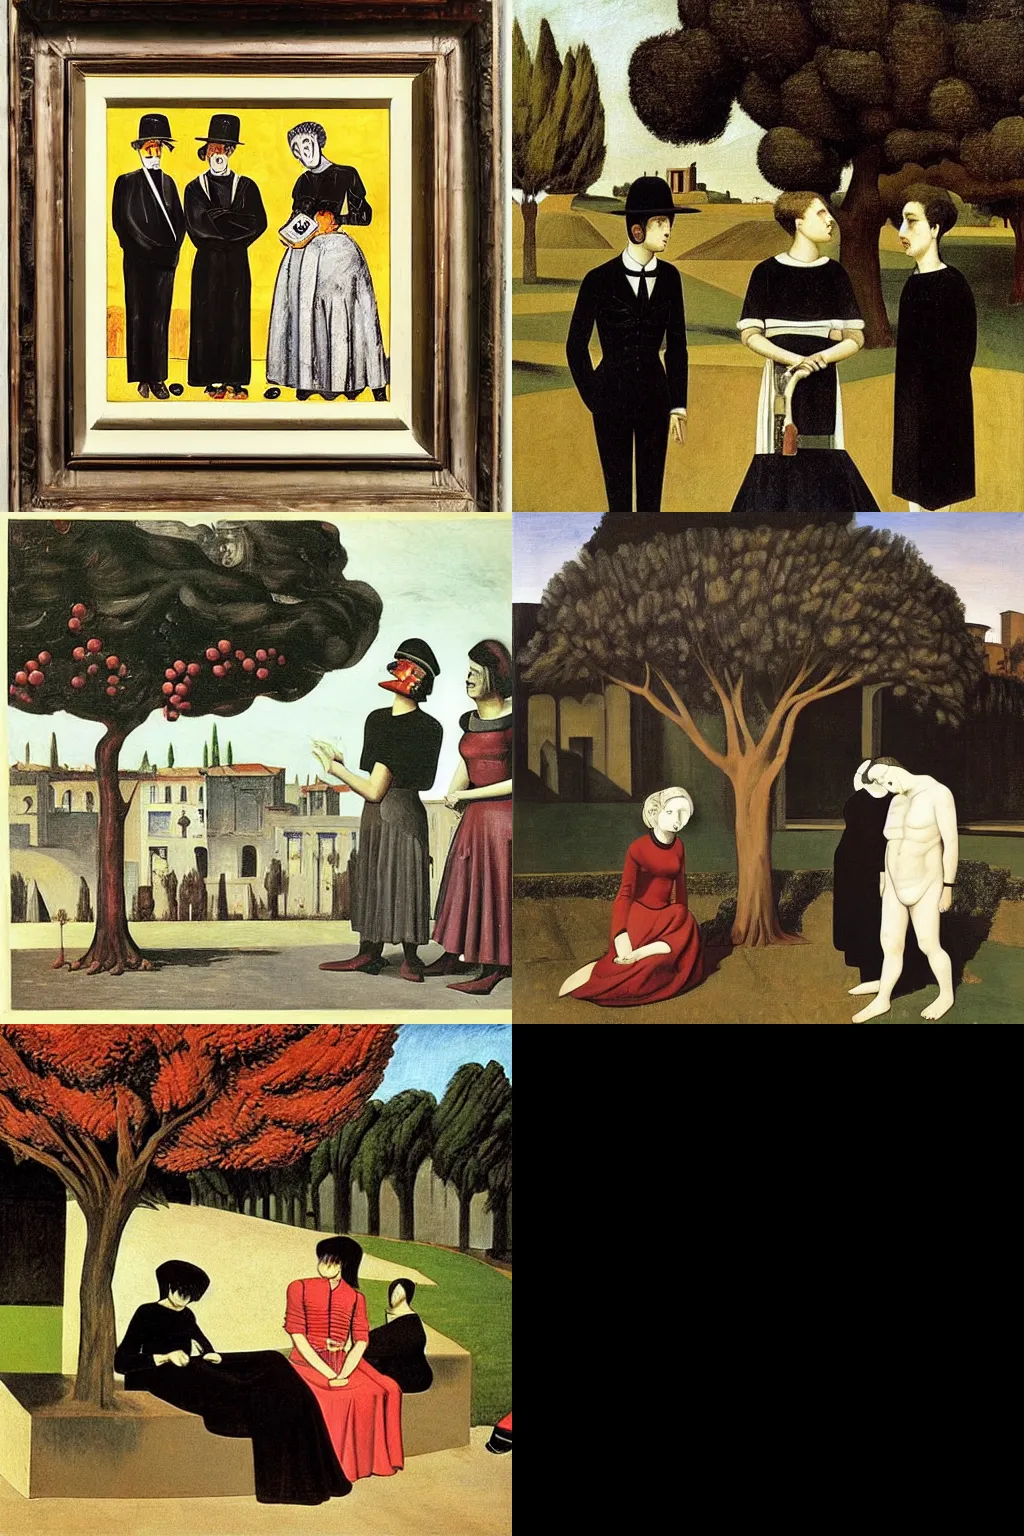 Prompt: an hd painting by giorgio de chirico. three goths loitering in the shade, talking beneath a cherry tree outside a blockbuster video store.